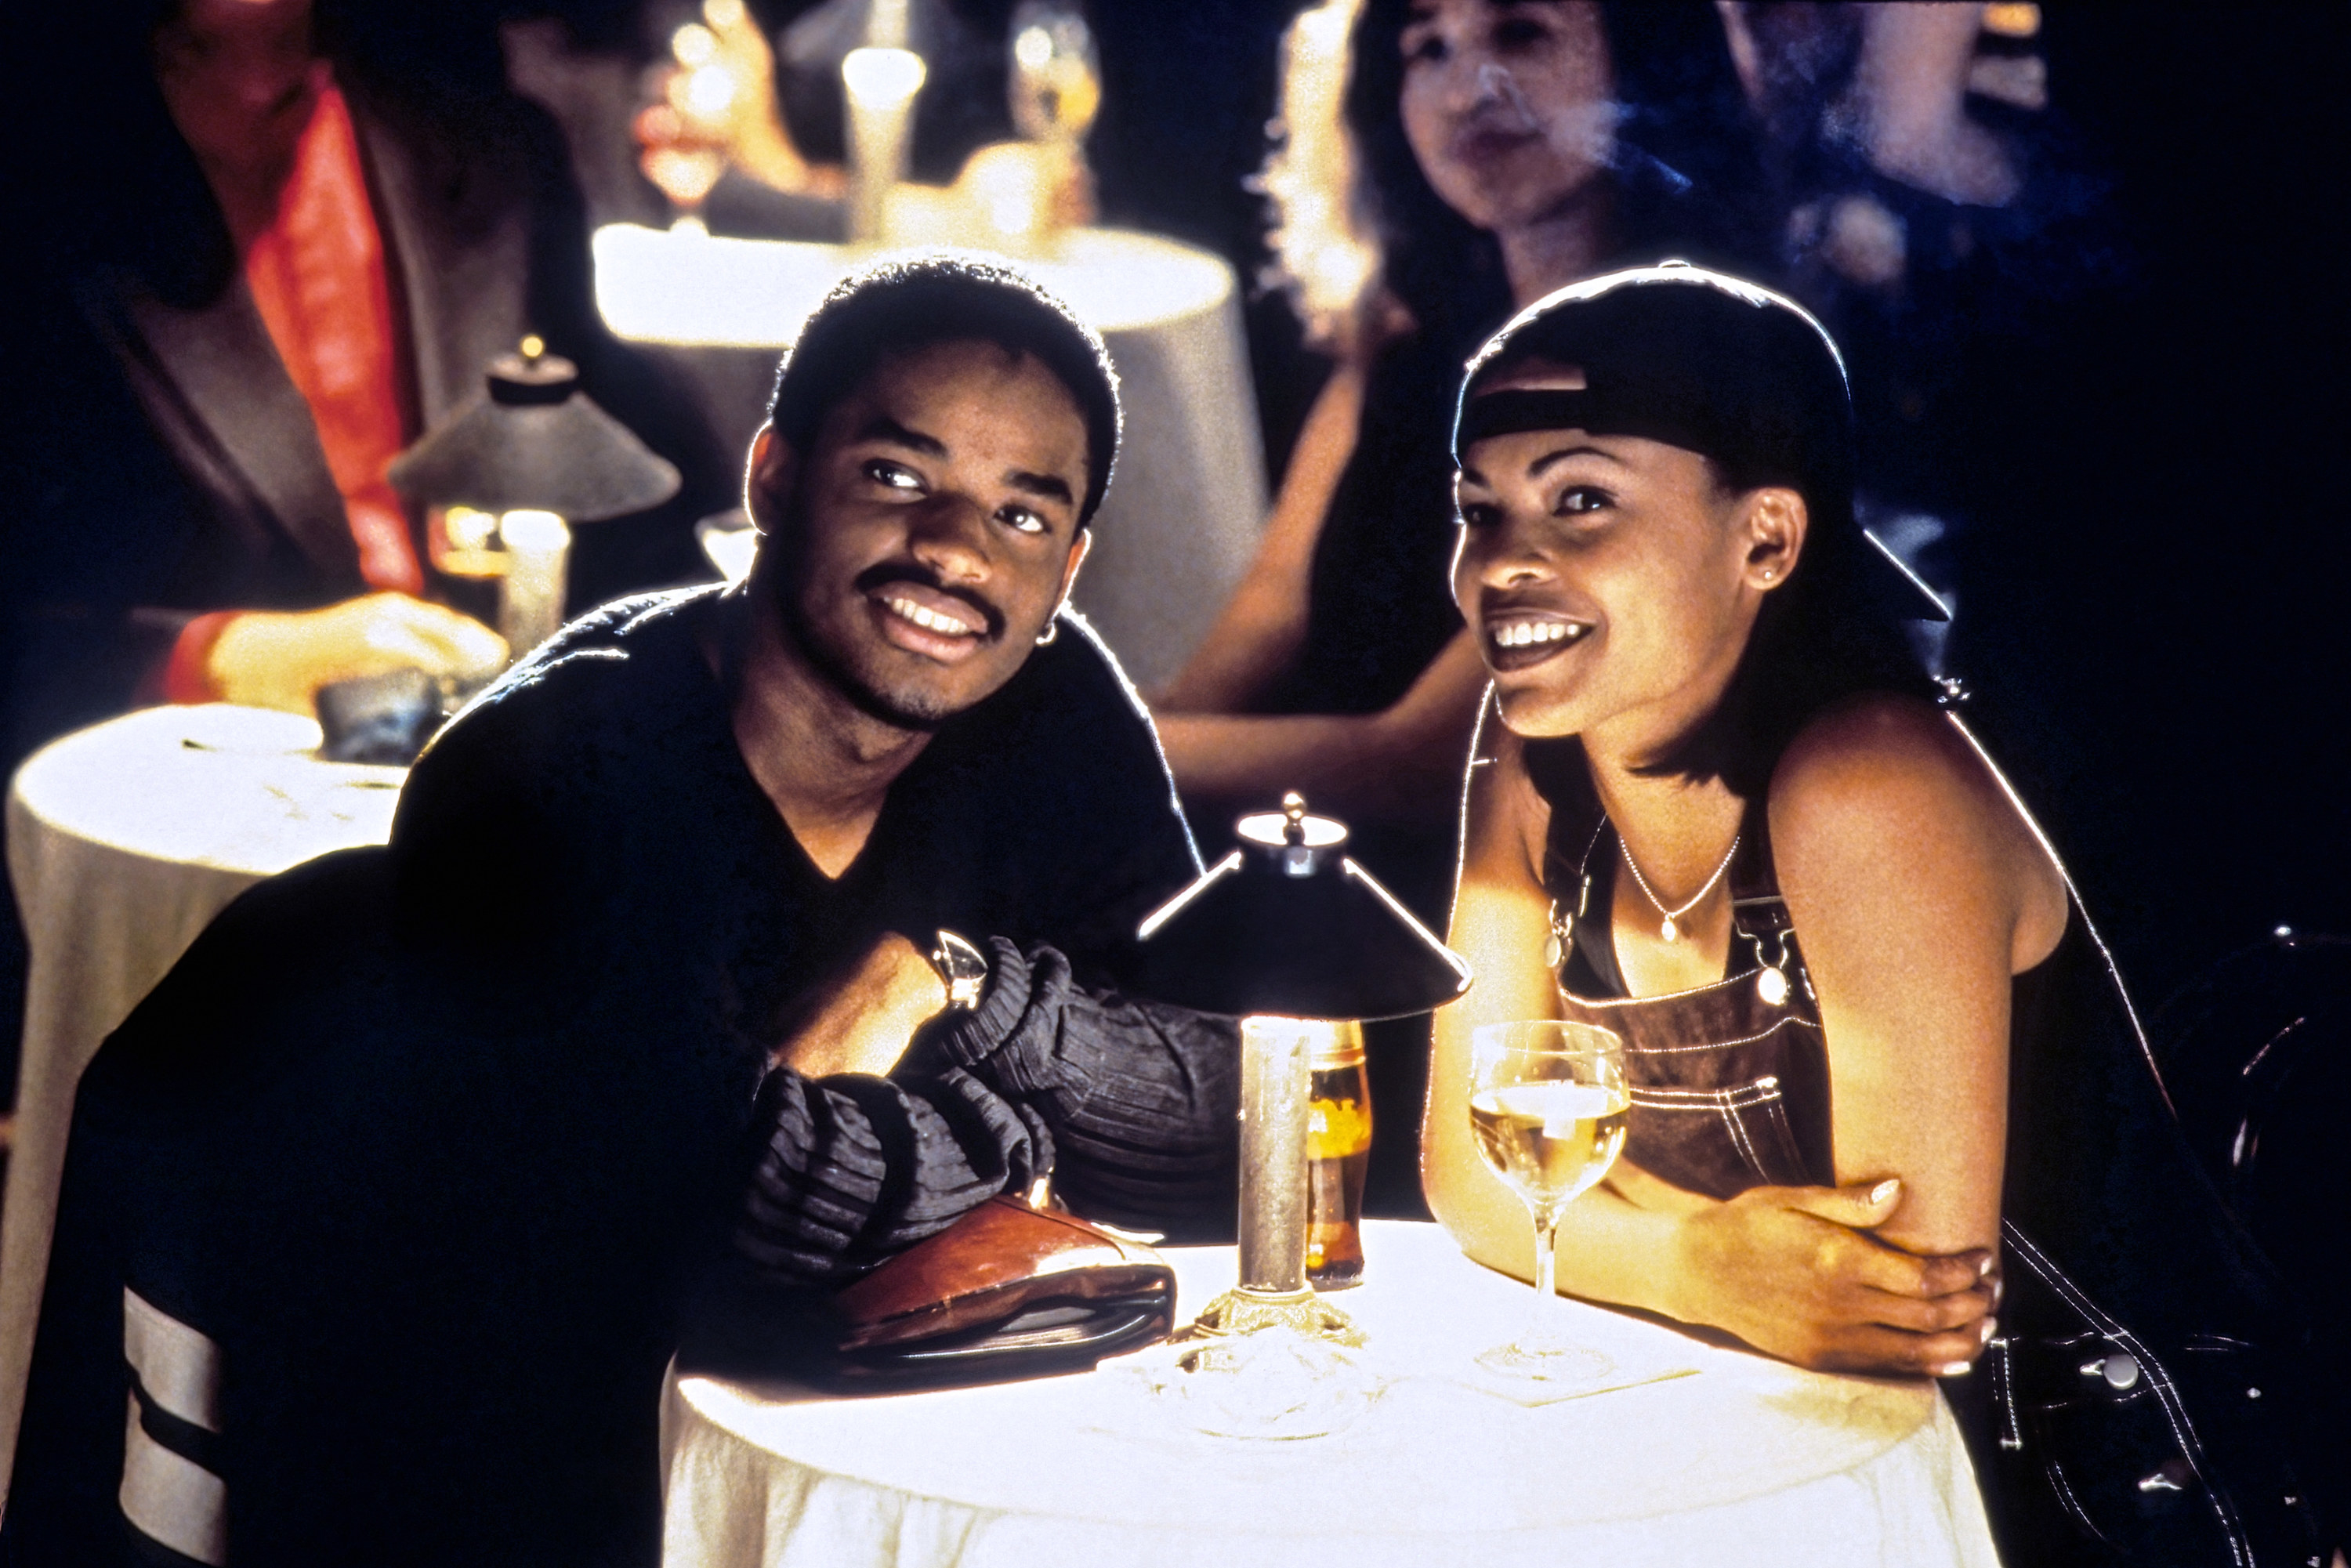 Nia and Larenz sitting at a table with drinks in a scene from the film